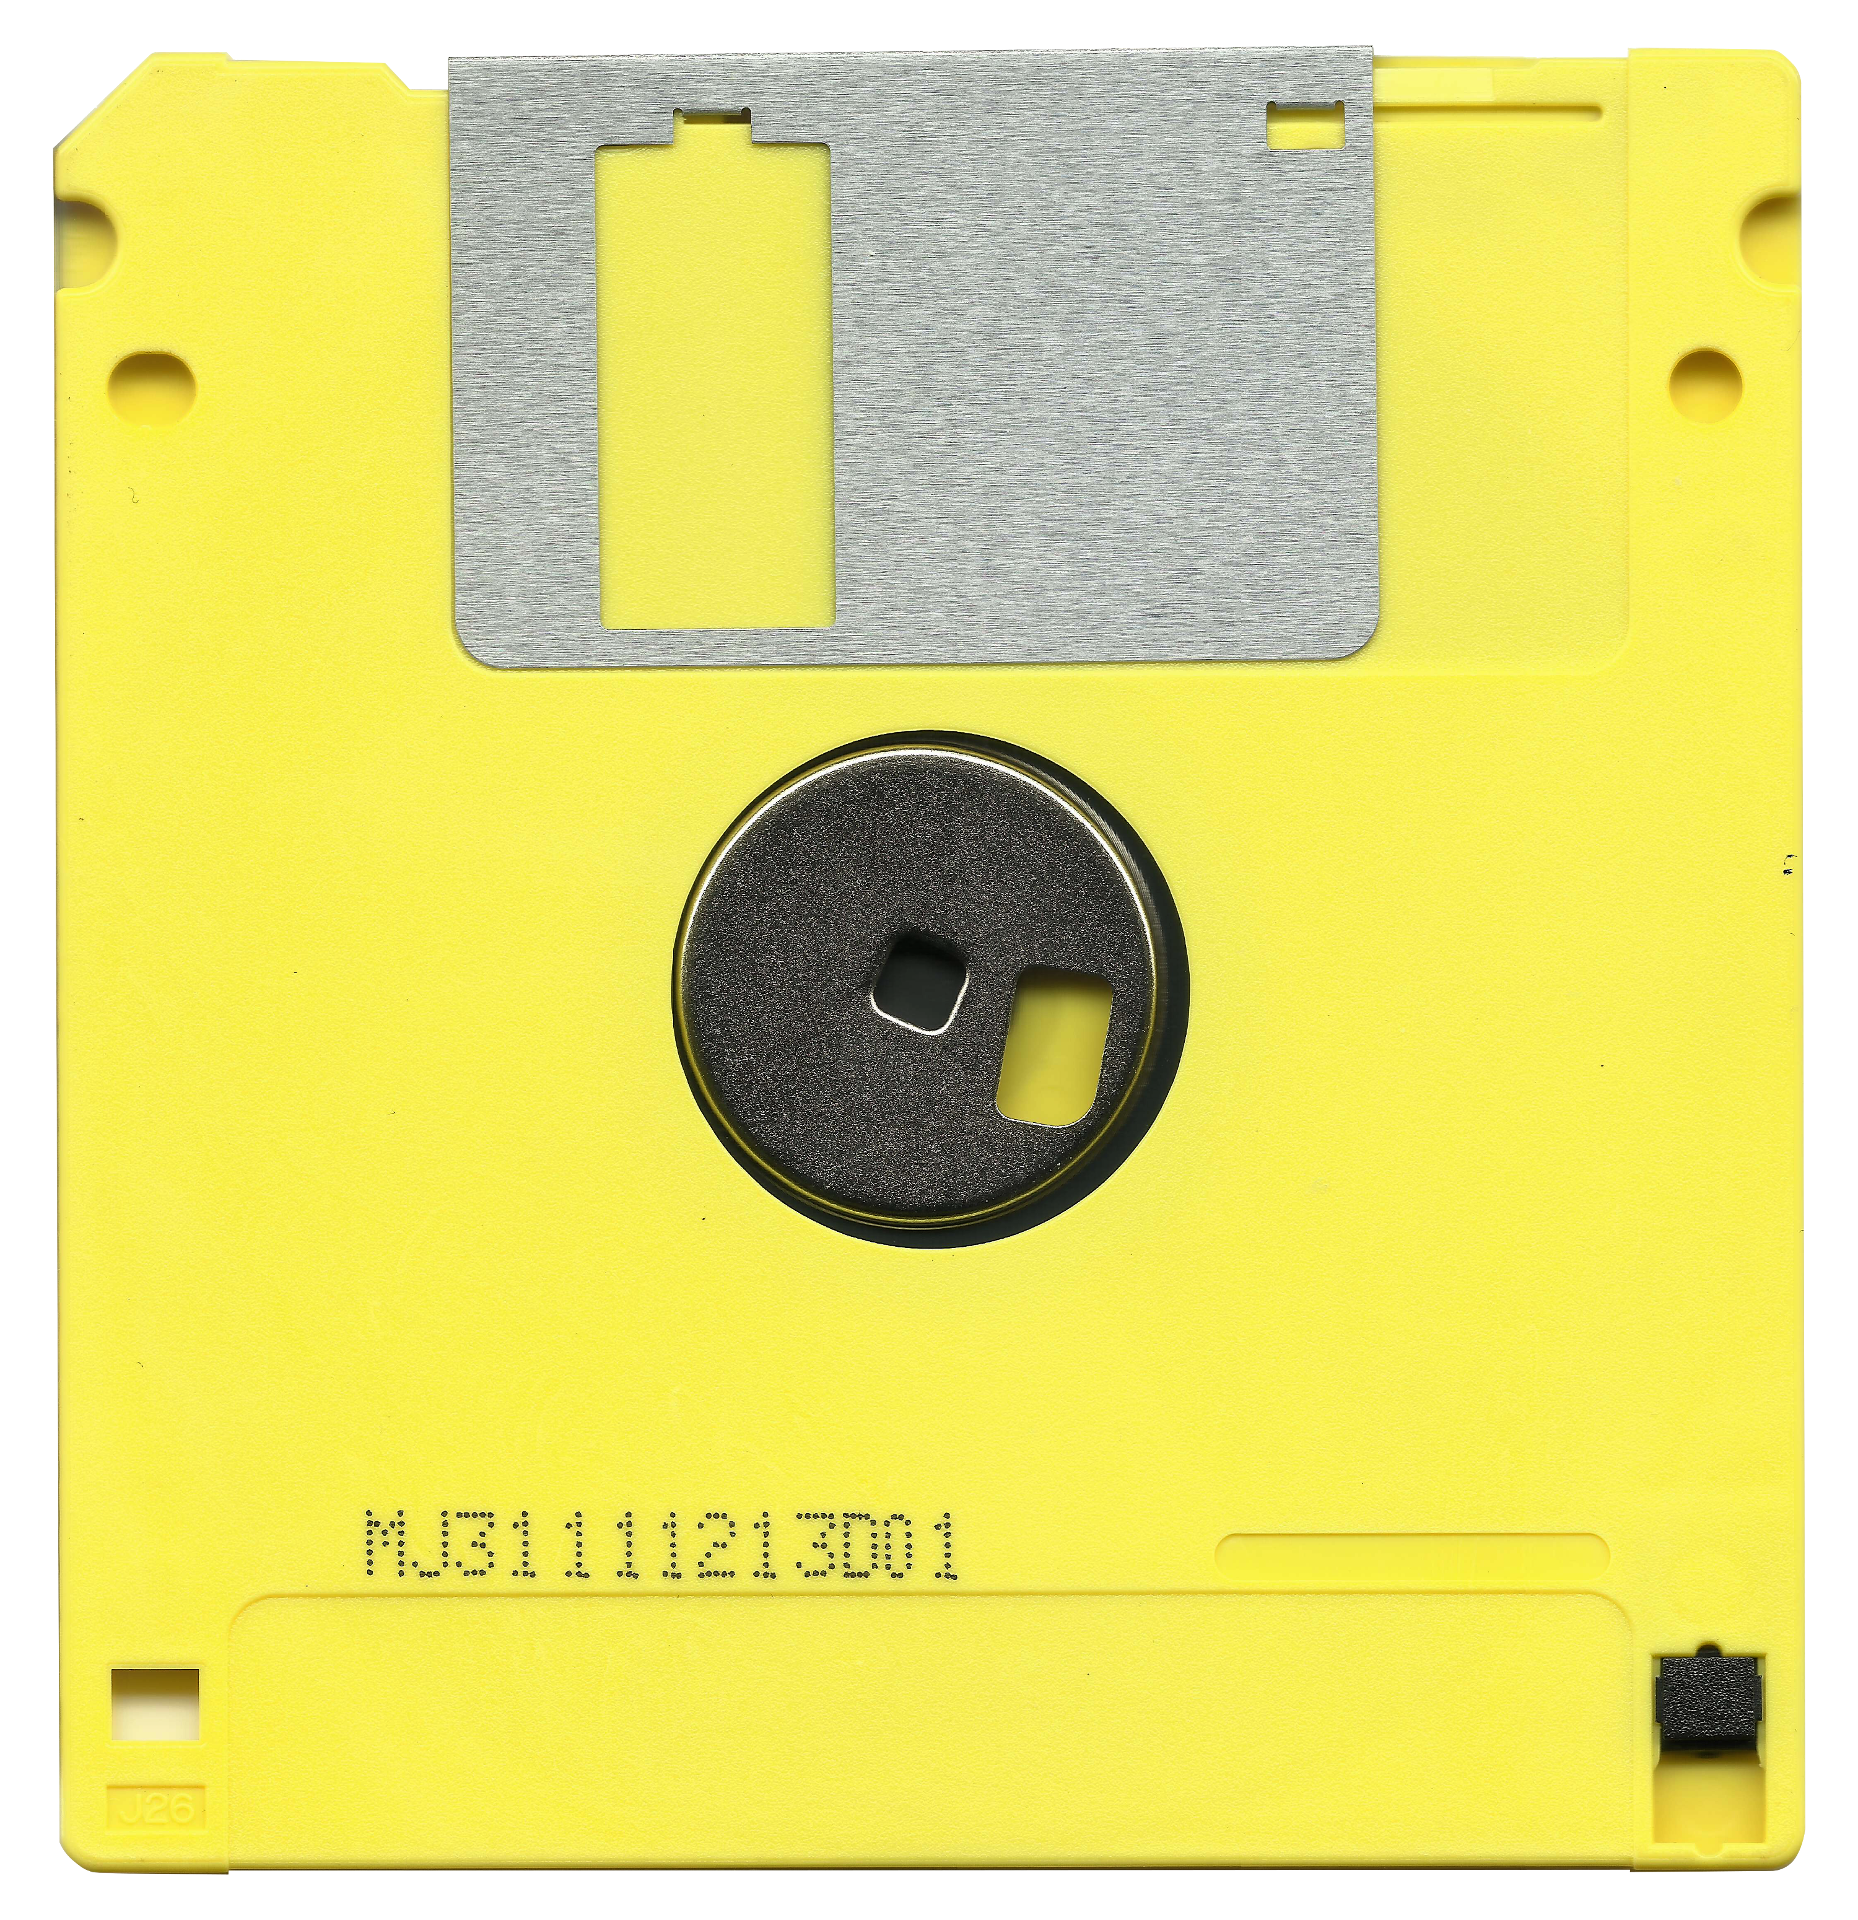 Yellow and black diskette mj31111213d01 photo